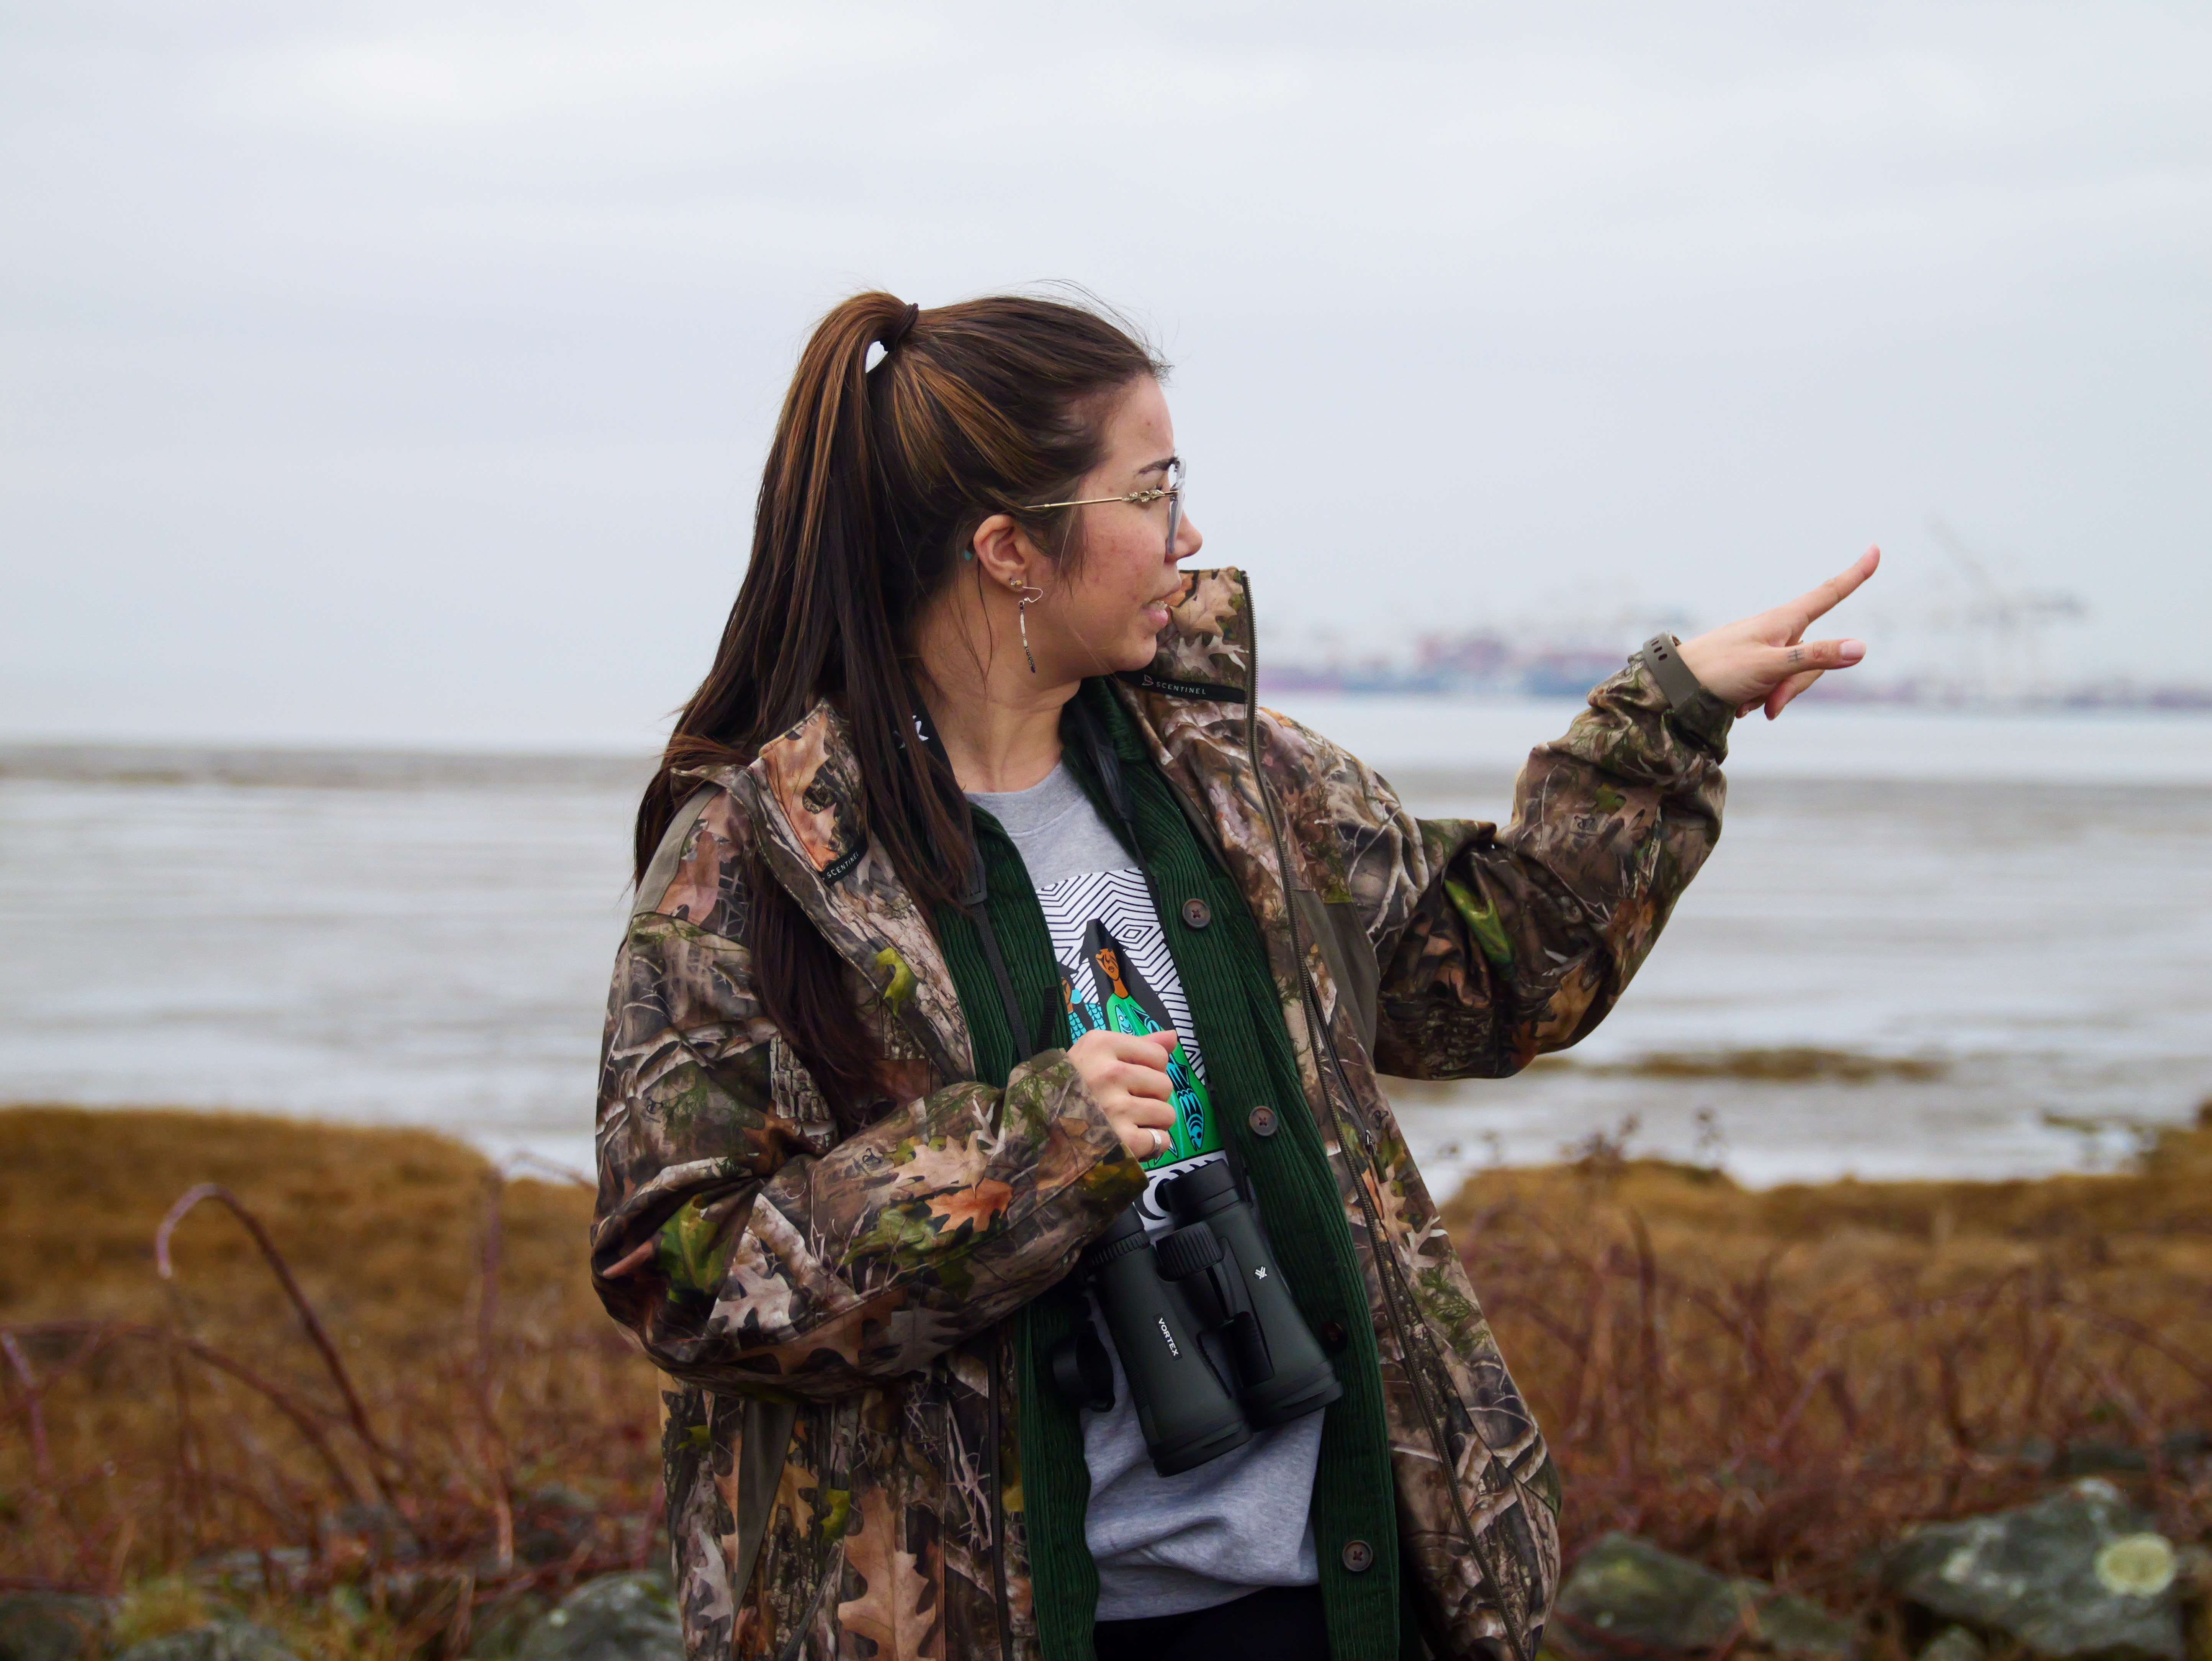 Tsawwassen youth pointing out bird species along the shore